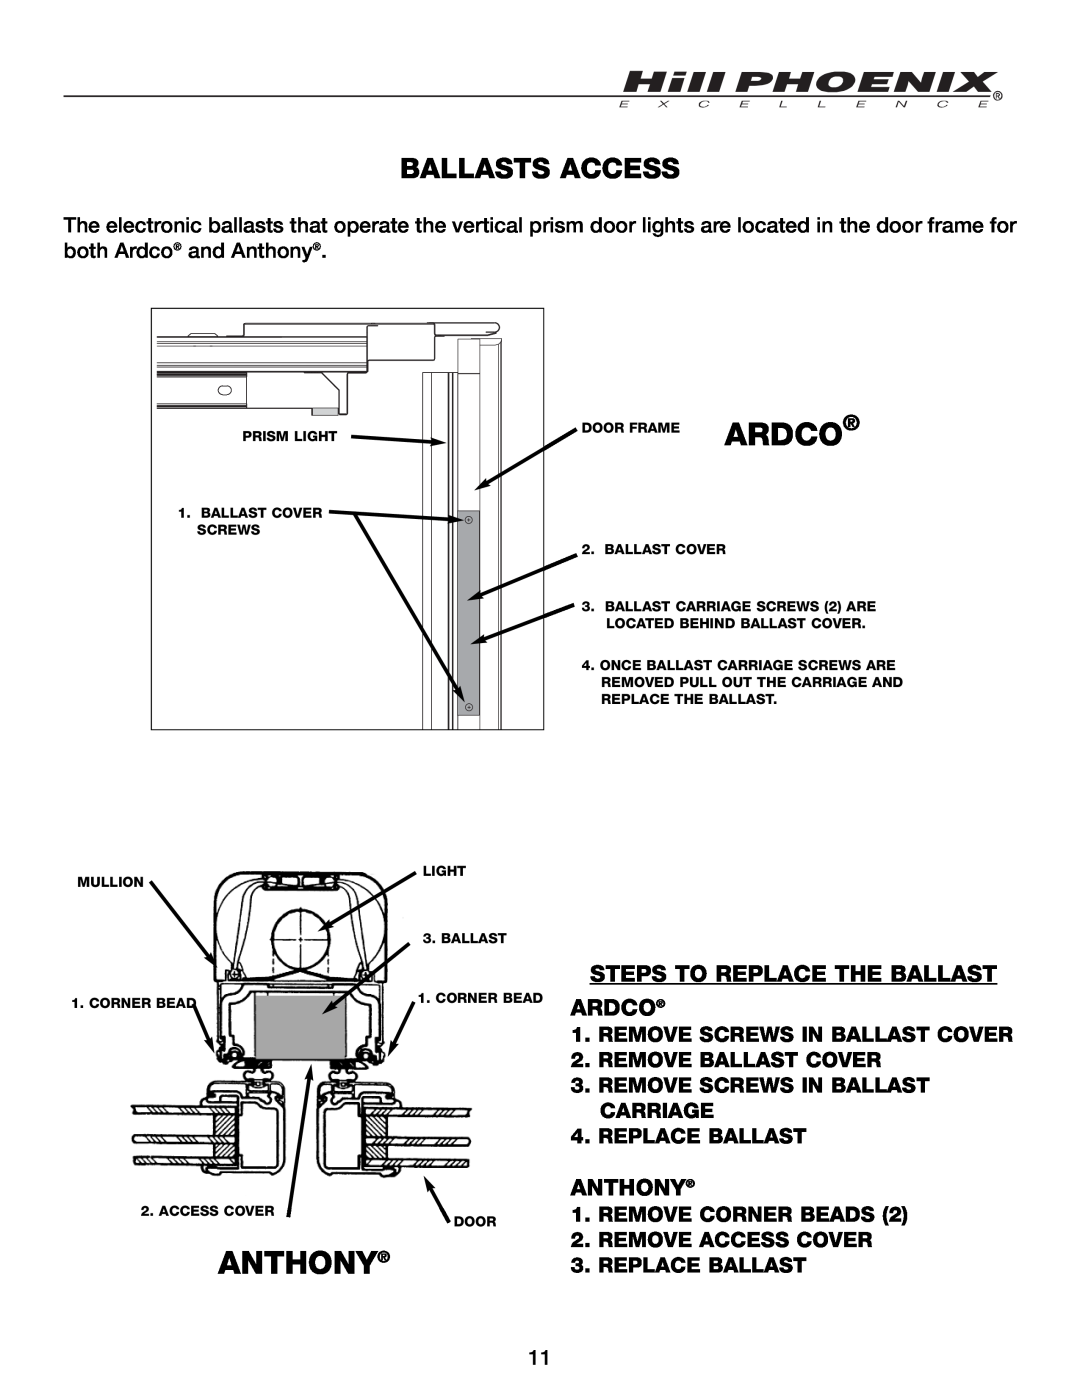 Hill Phoenix KRZH manual Ardco, Anthony, Ballasts Access, Steps To Replace The Ballast 